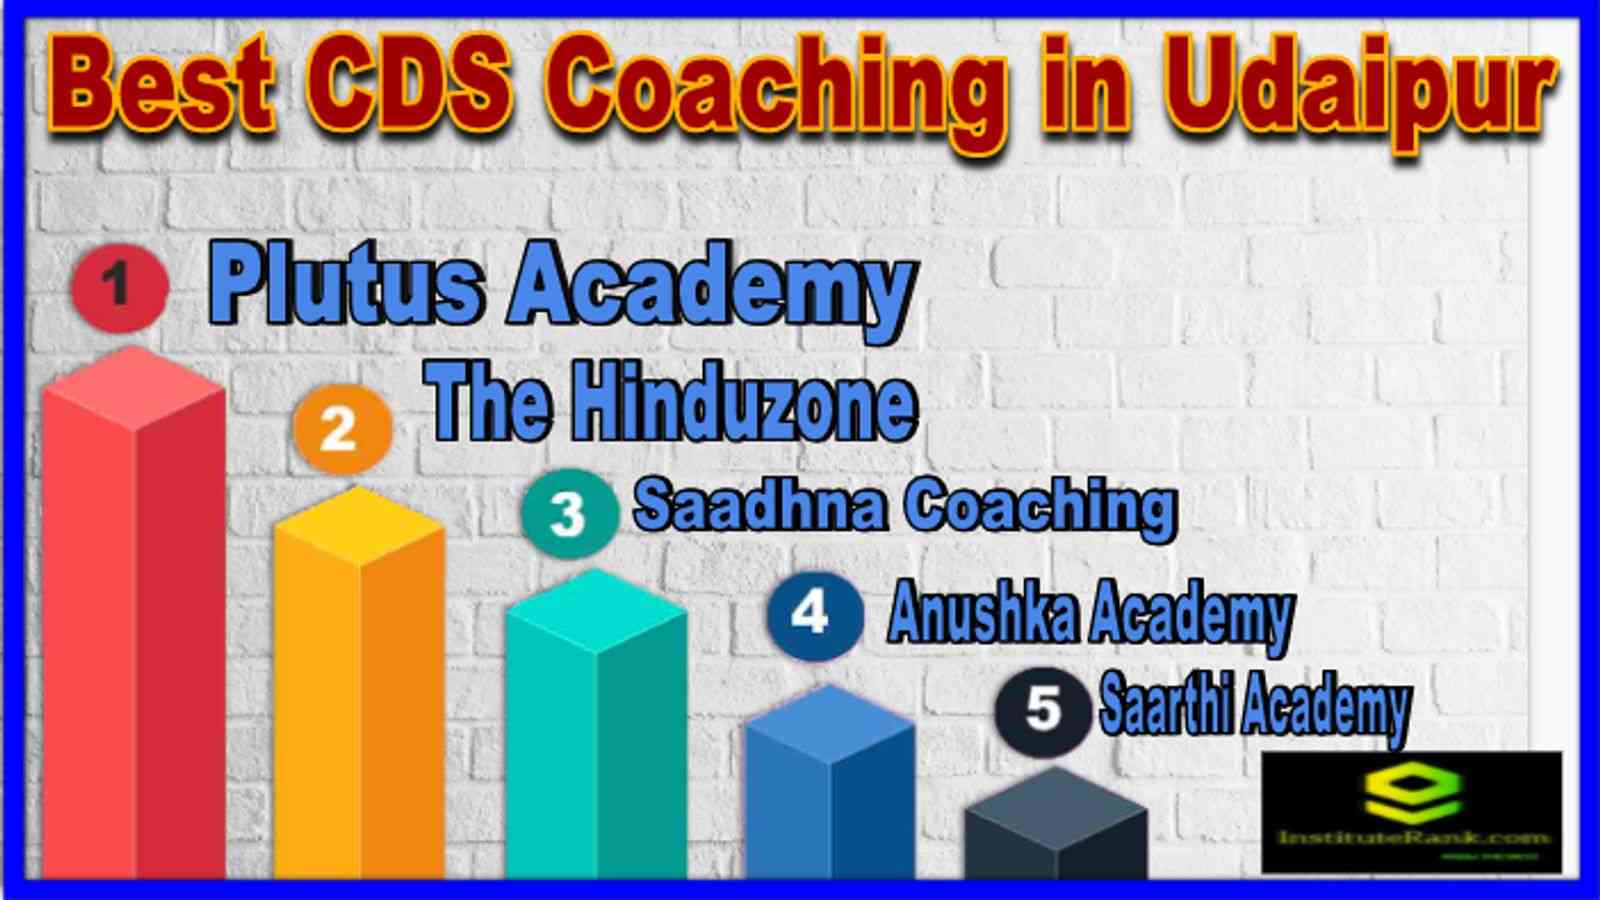 Best CDS Coaching in Udaipur